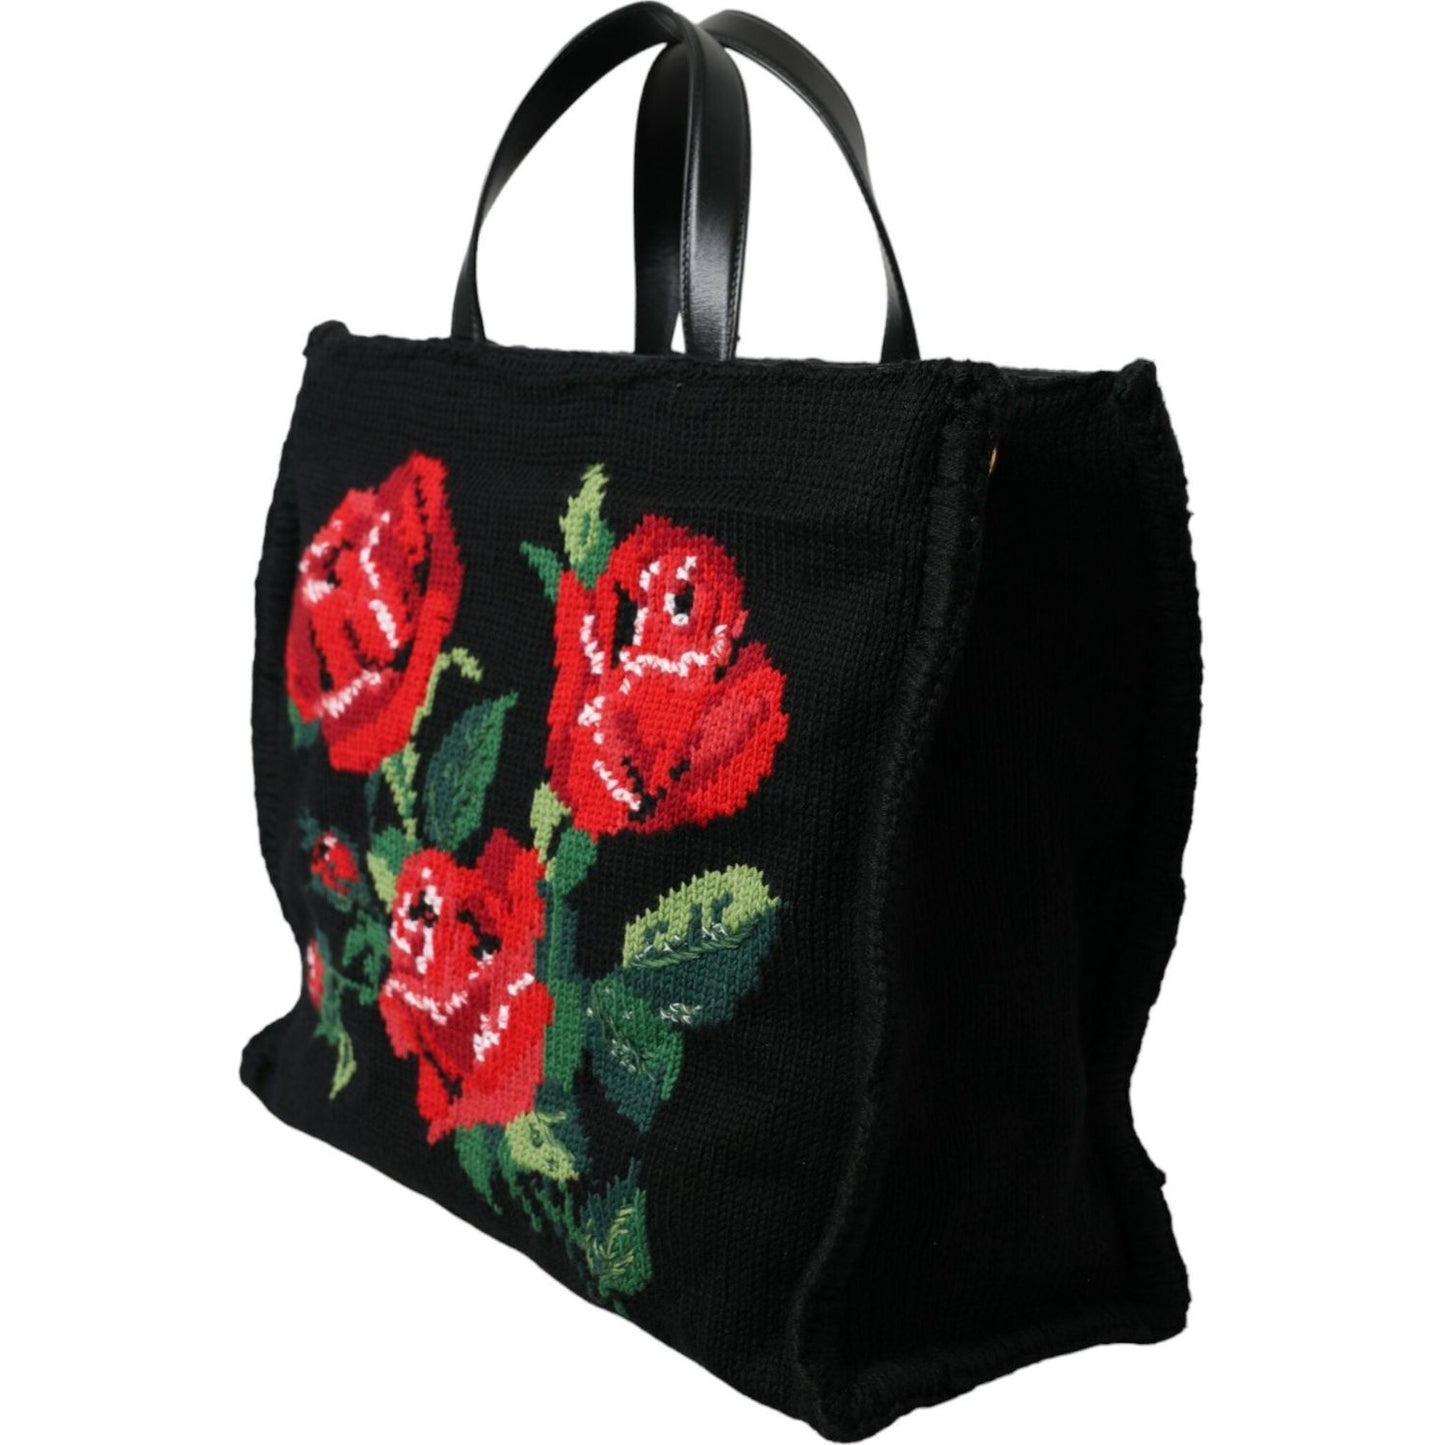 Dolce & Gabbana Chic Embroidered Floral Black Tote chic-embroidered-floral-black-tote